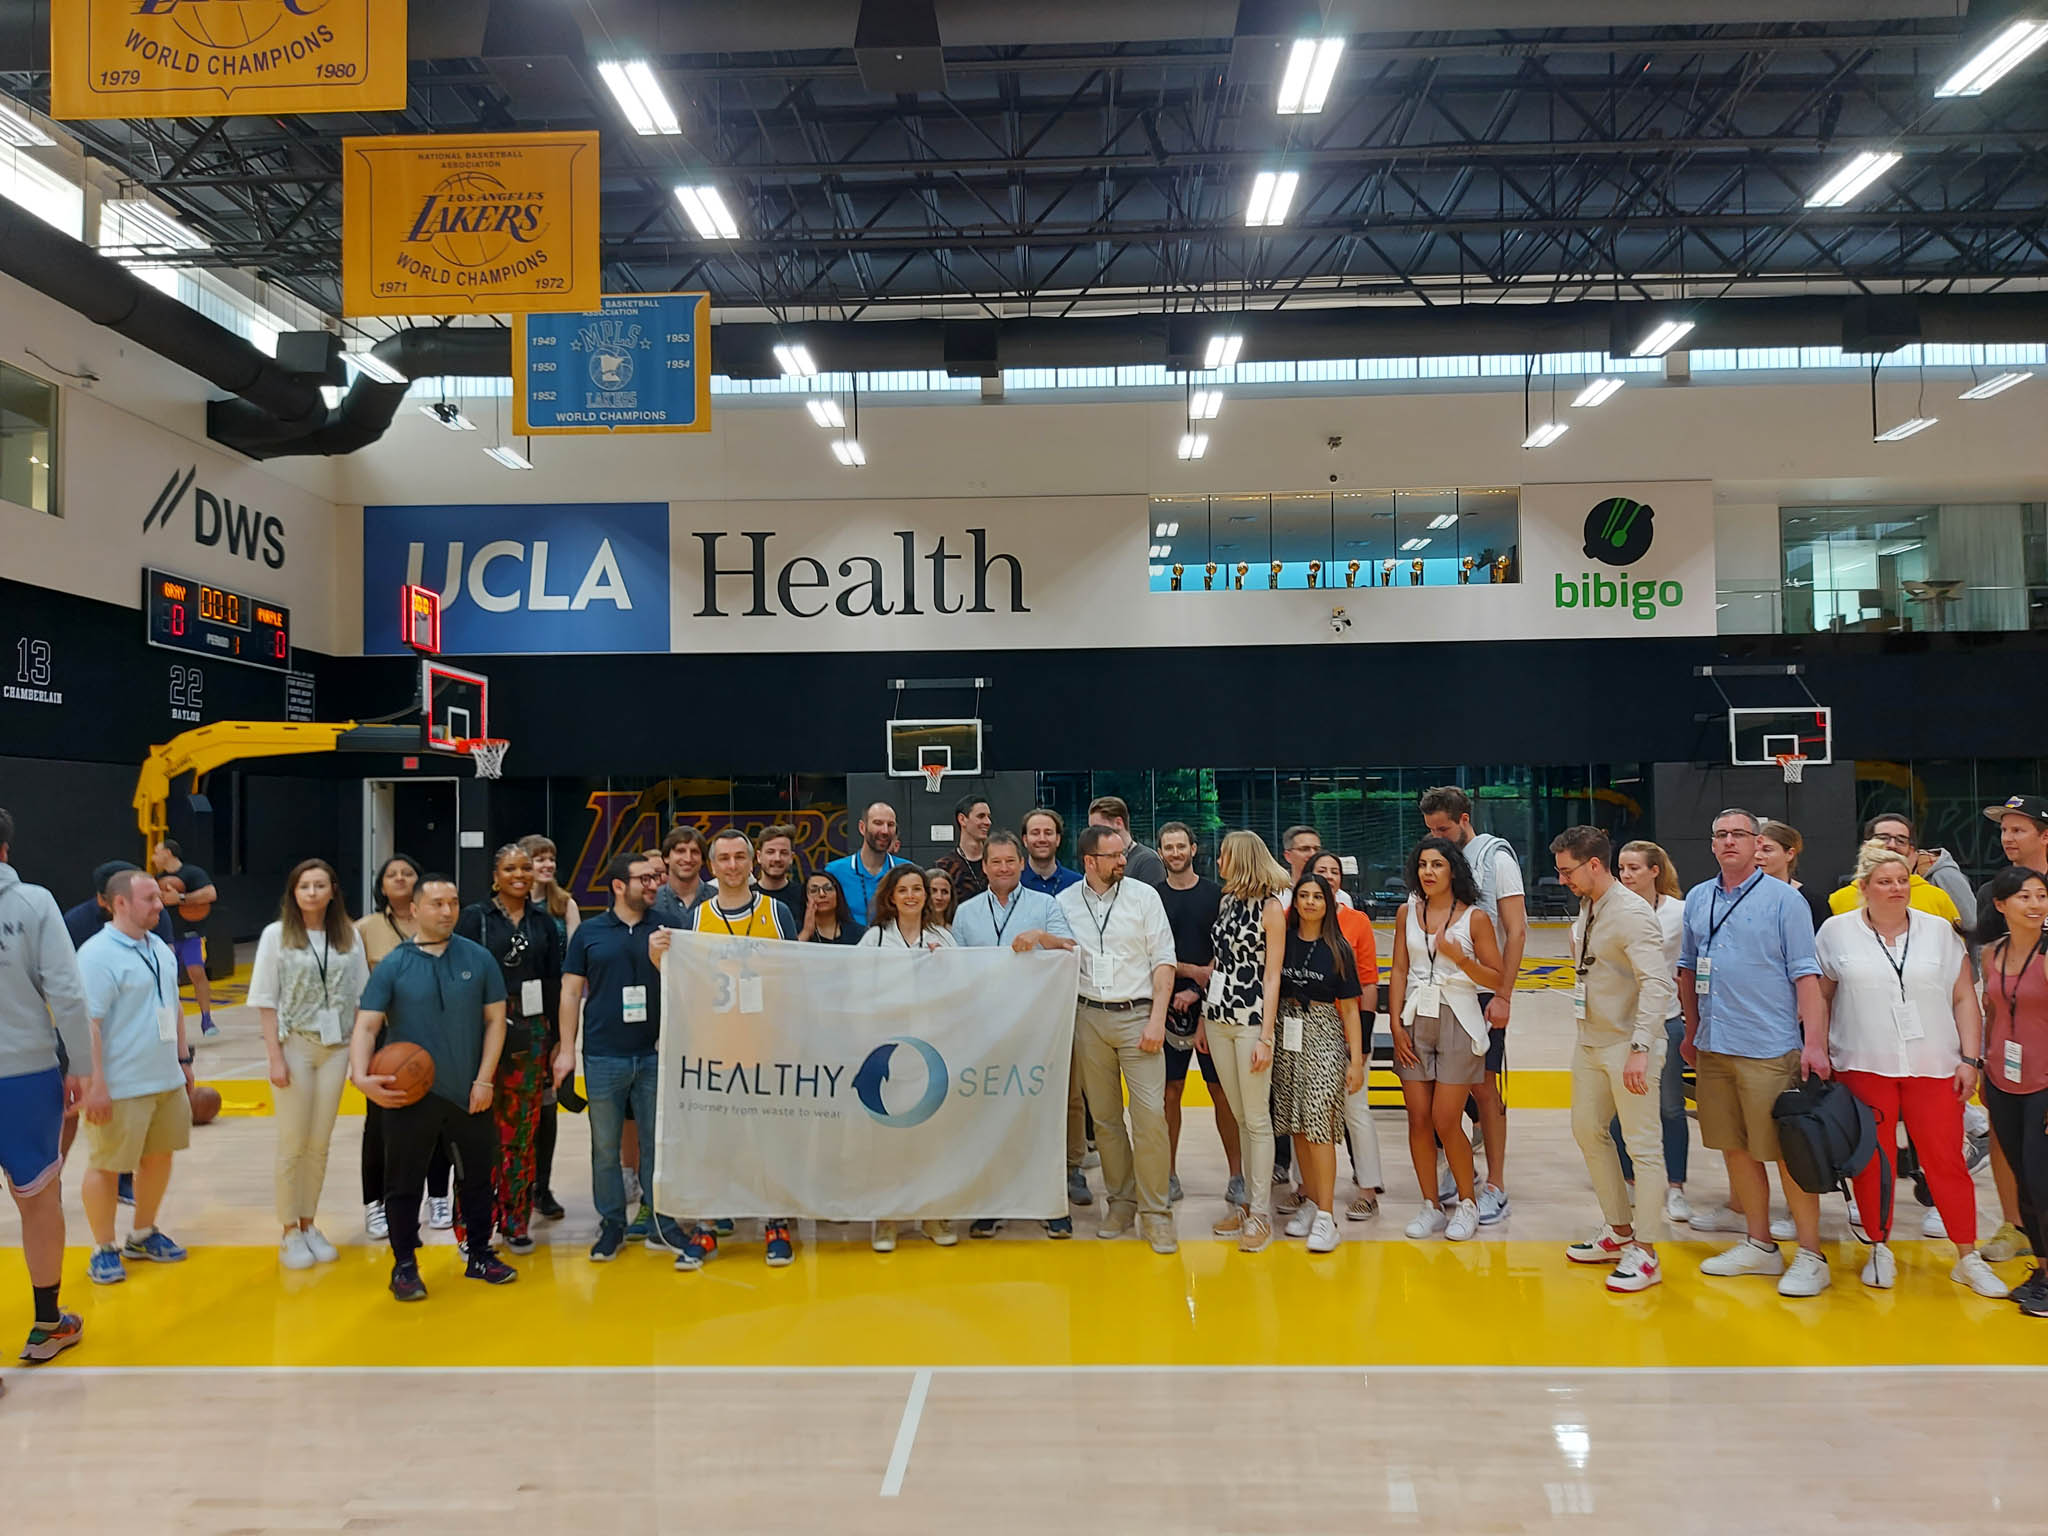 Healthy Seas in LA with DWS and The Lakers